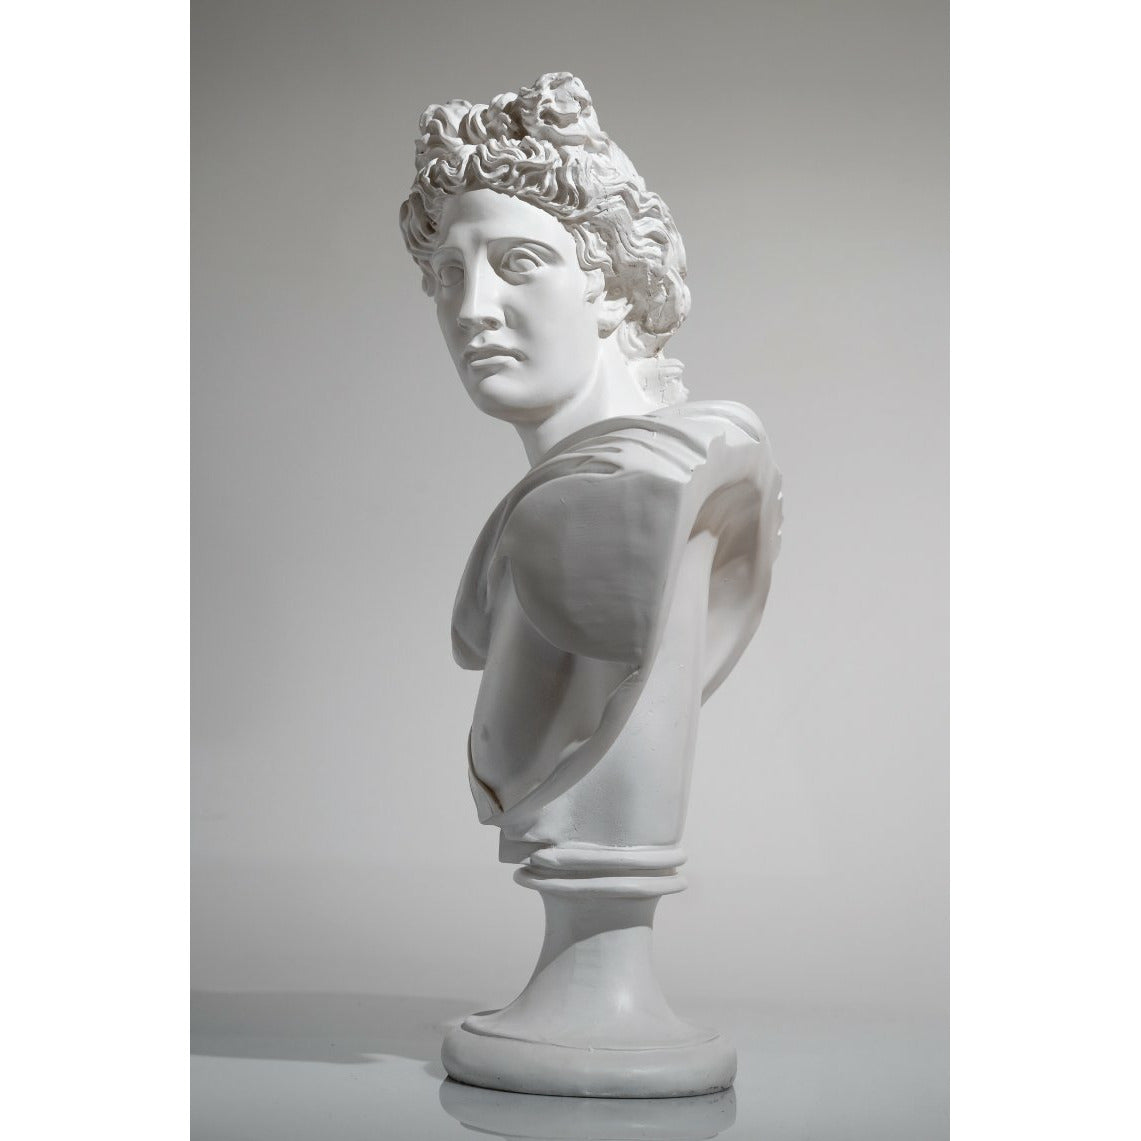 White Apollo Bust Sculpture - Our White Apollo Bust Sculpture is a timeless piece that’s an icon of Greek and Roman mythology.